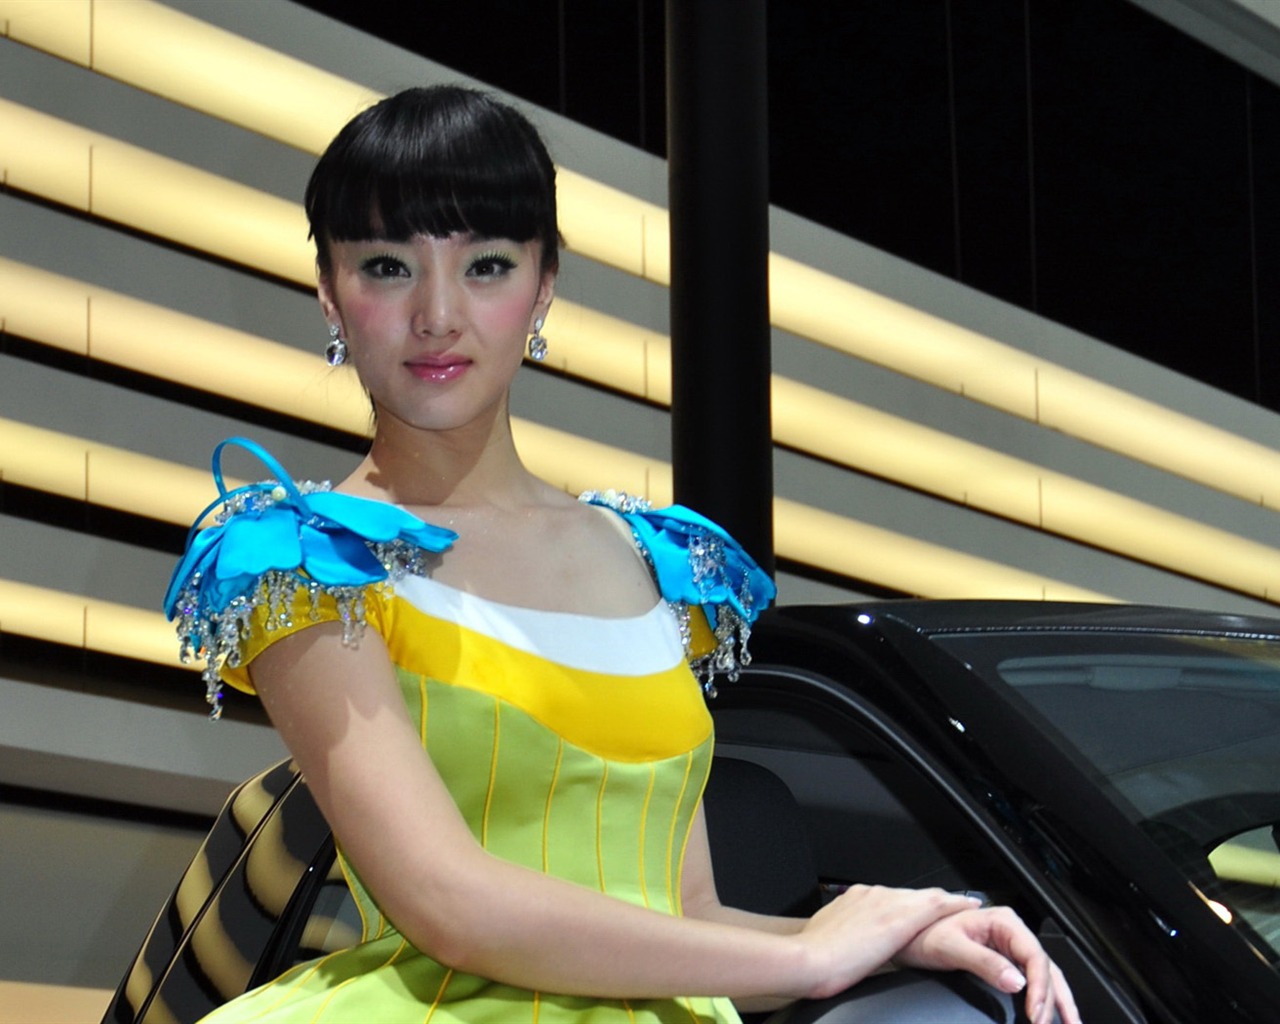 2010 Beijing Auto Show car models Collection (2) #3 - 1280x1024